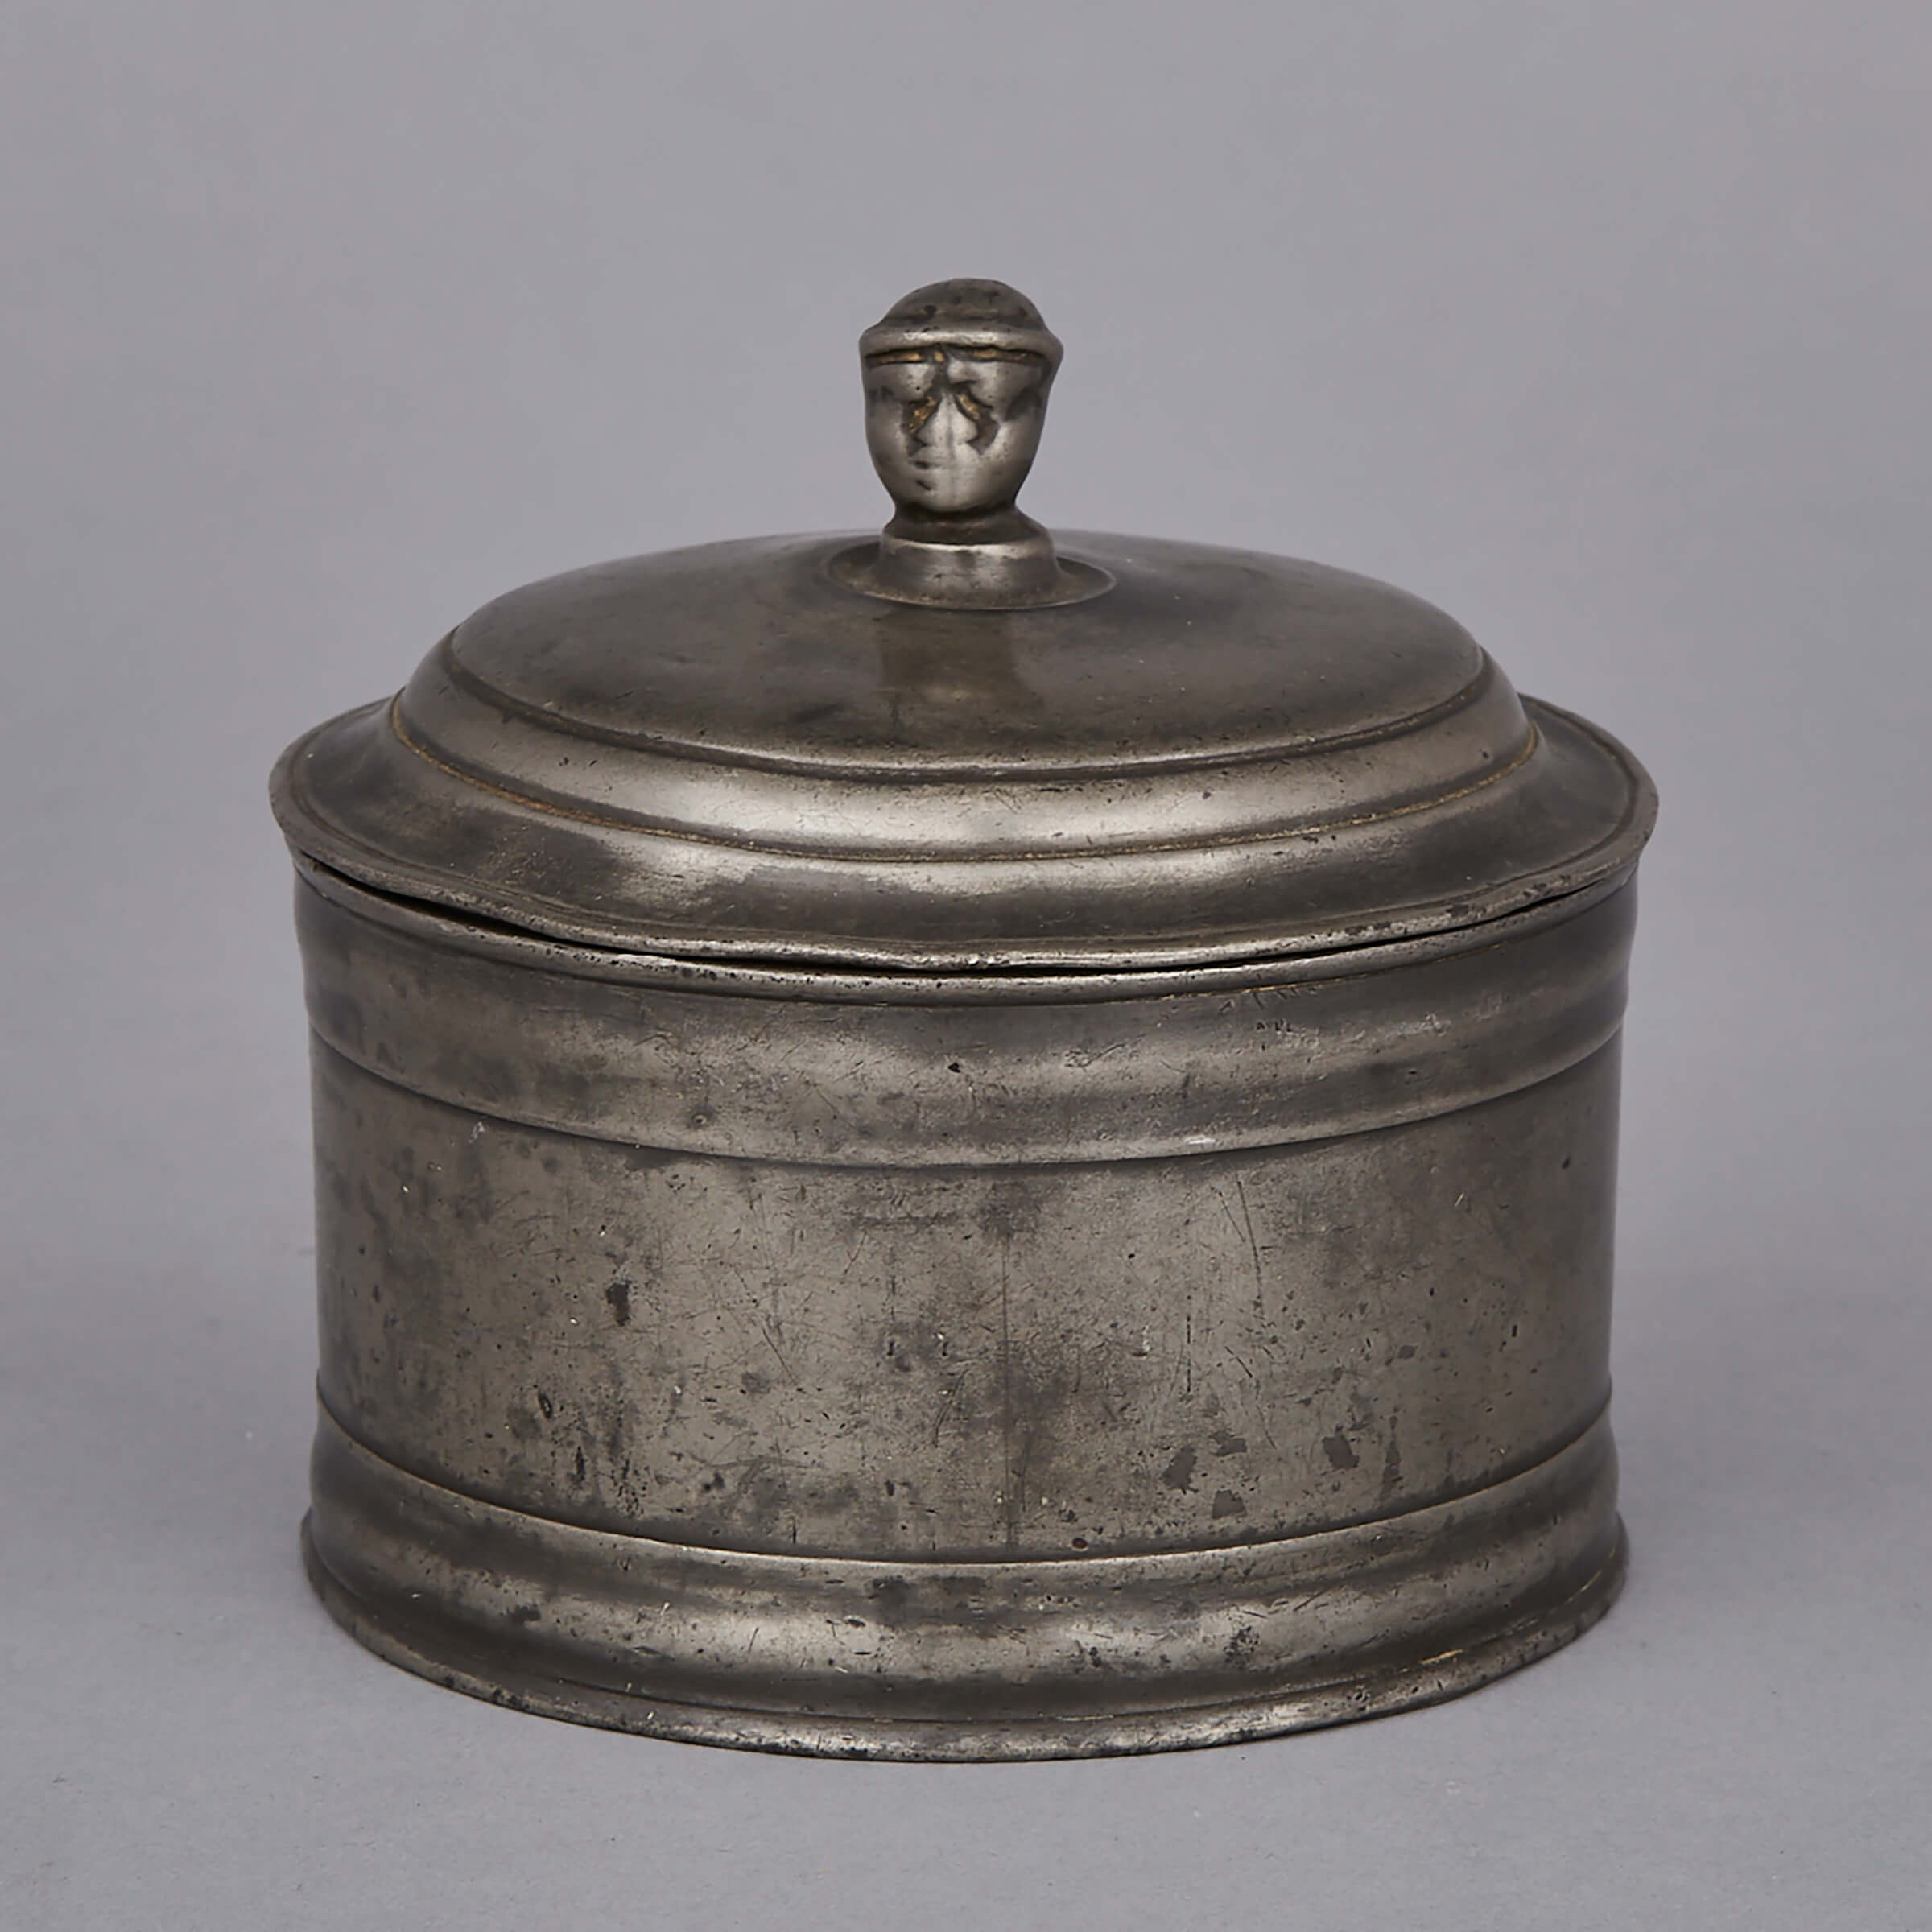 English Pewter Tobacco Box, early 19th century